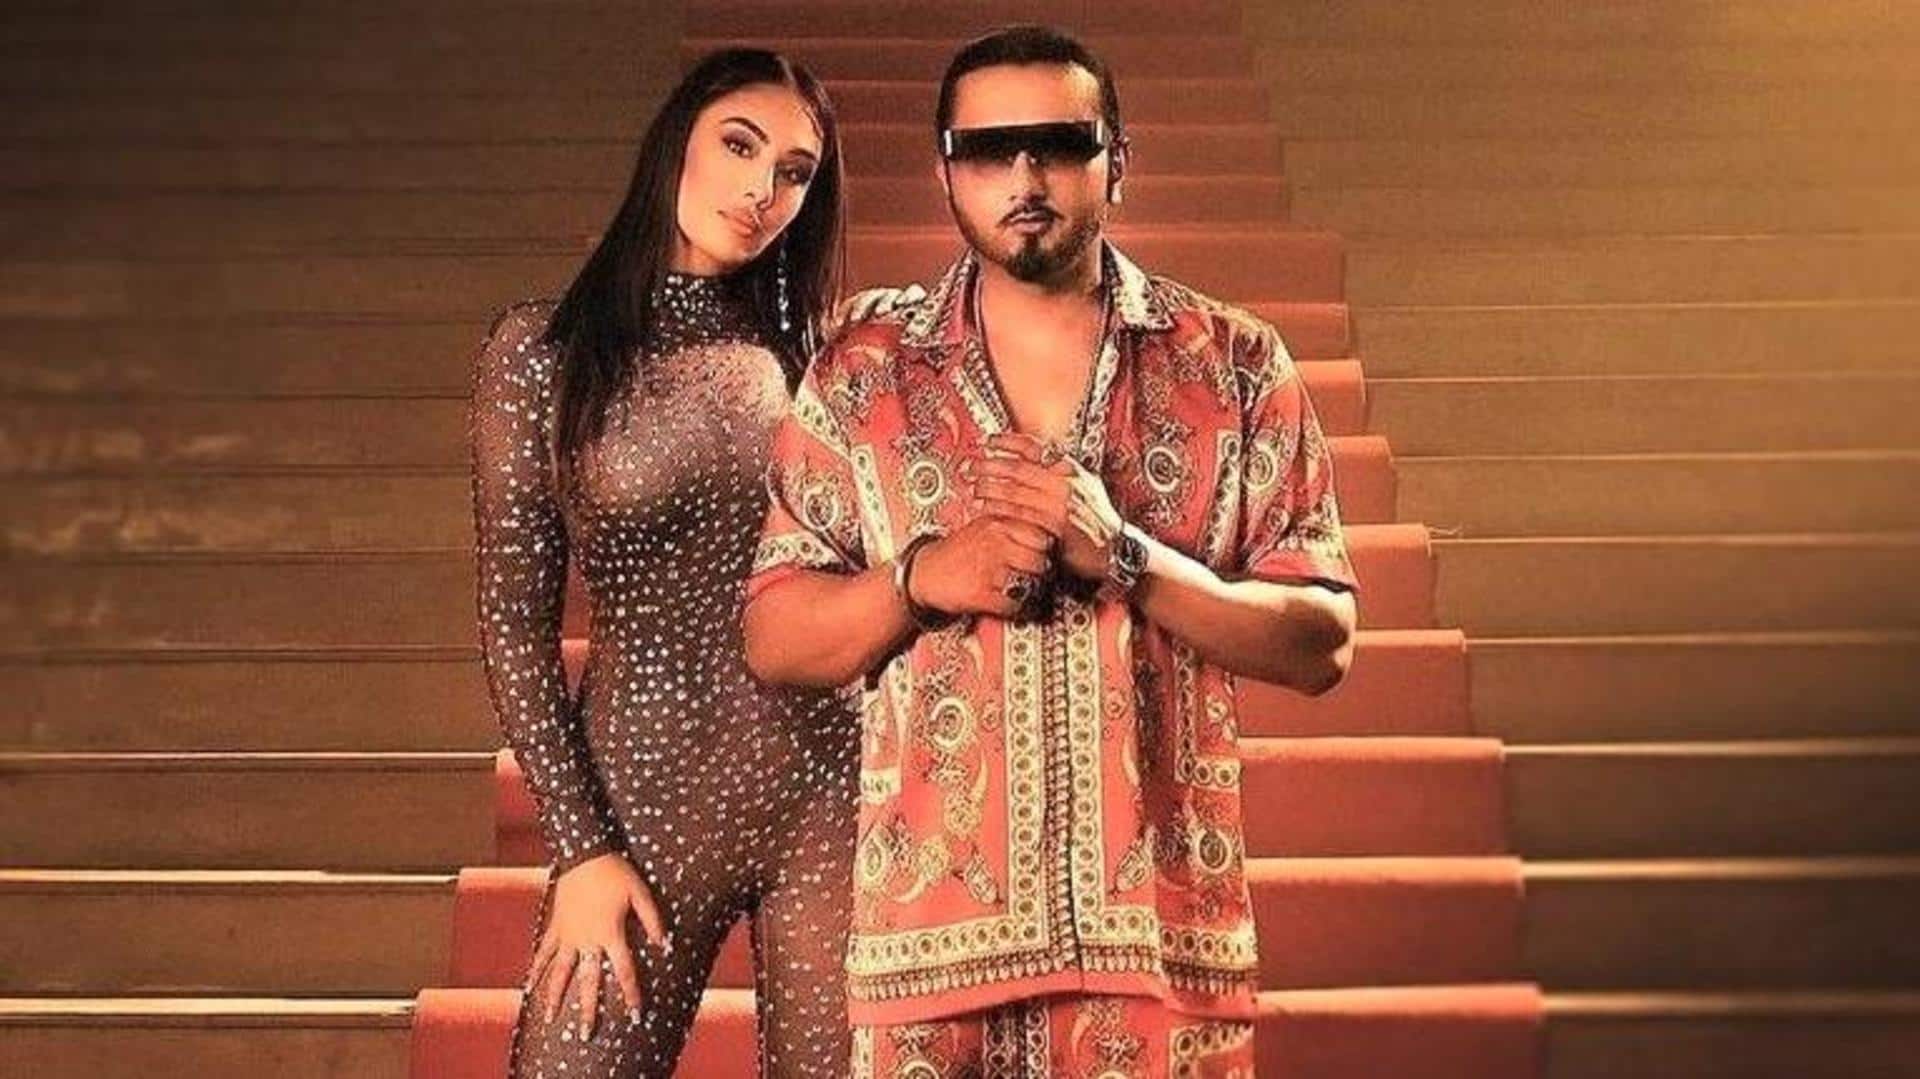 Rapper Honey Singh and Tina Thadani call it quits: Reports